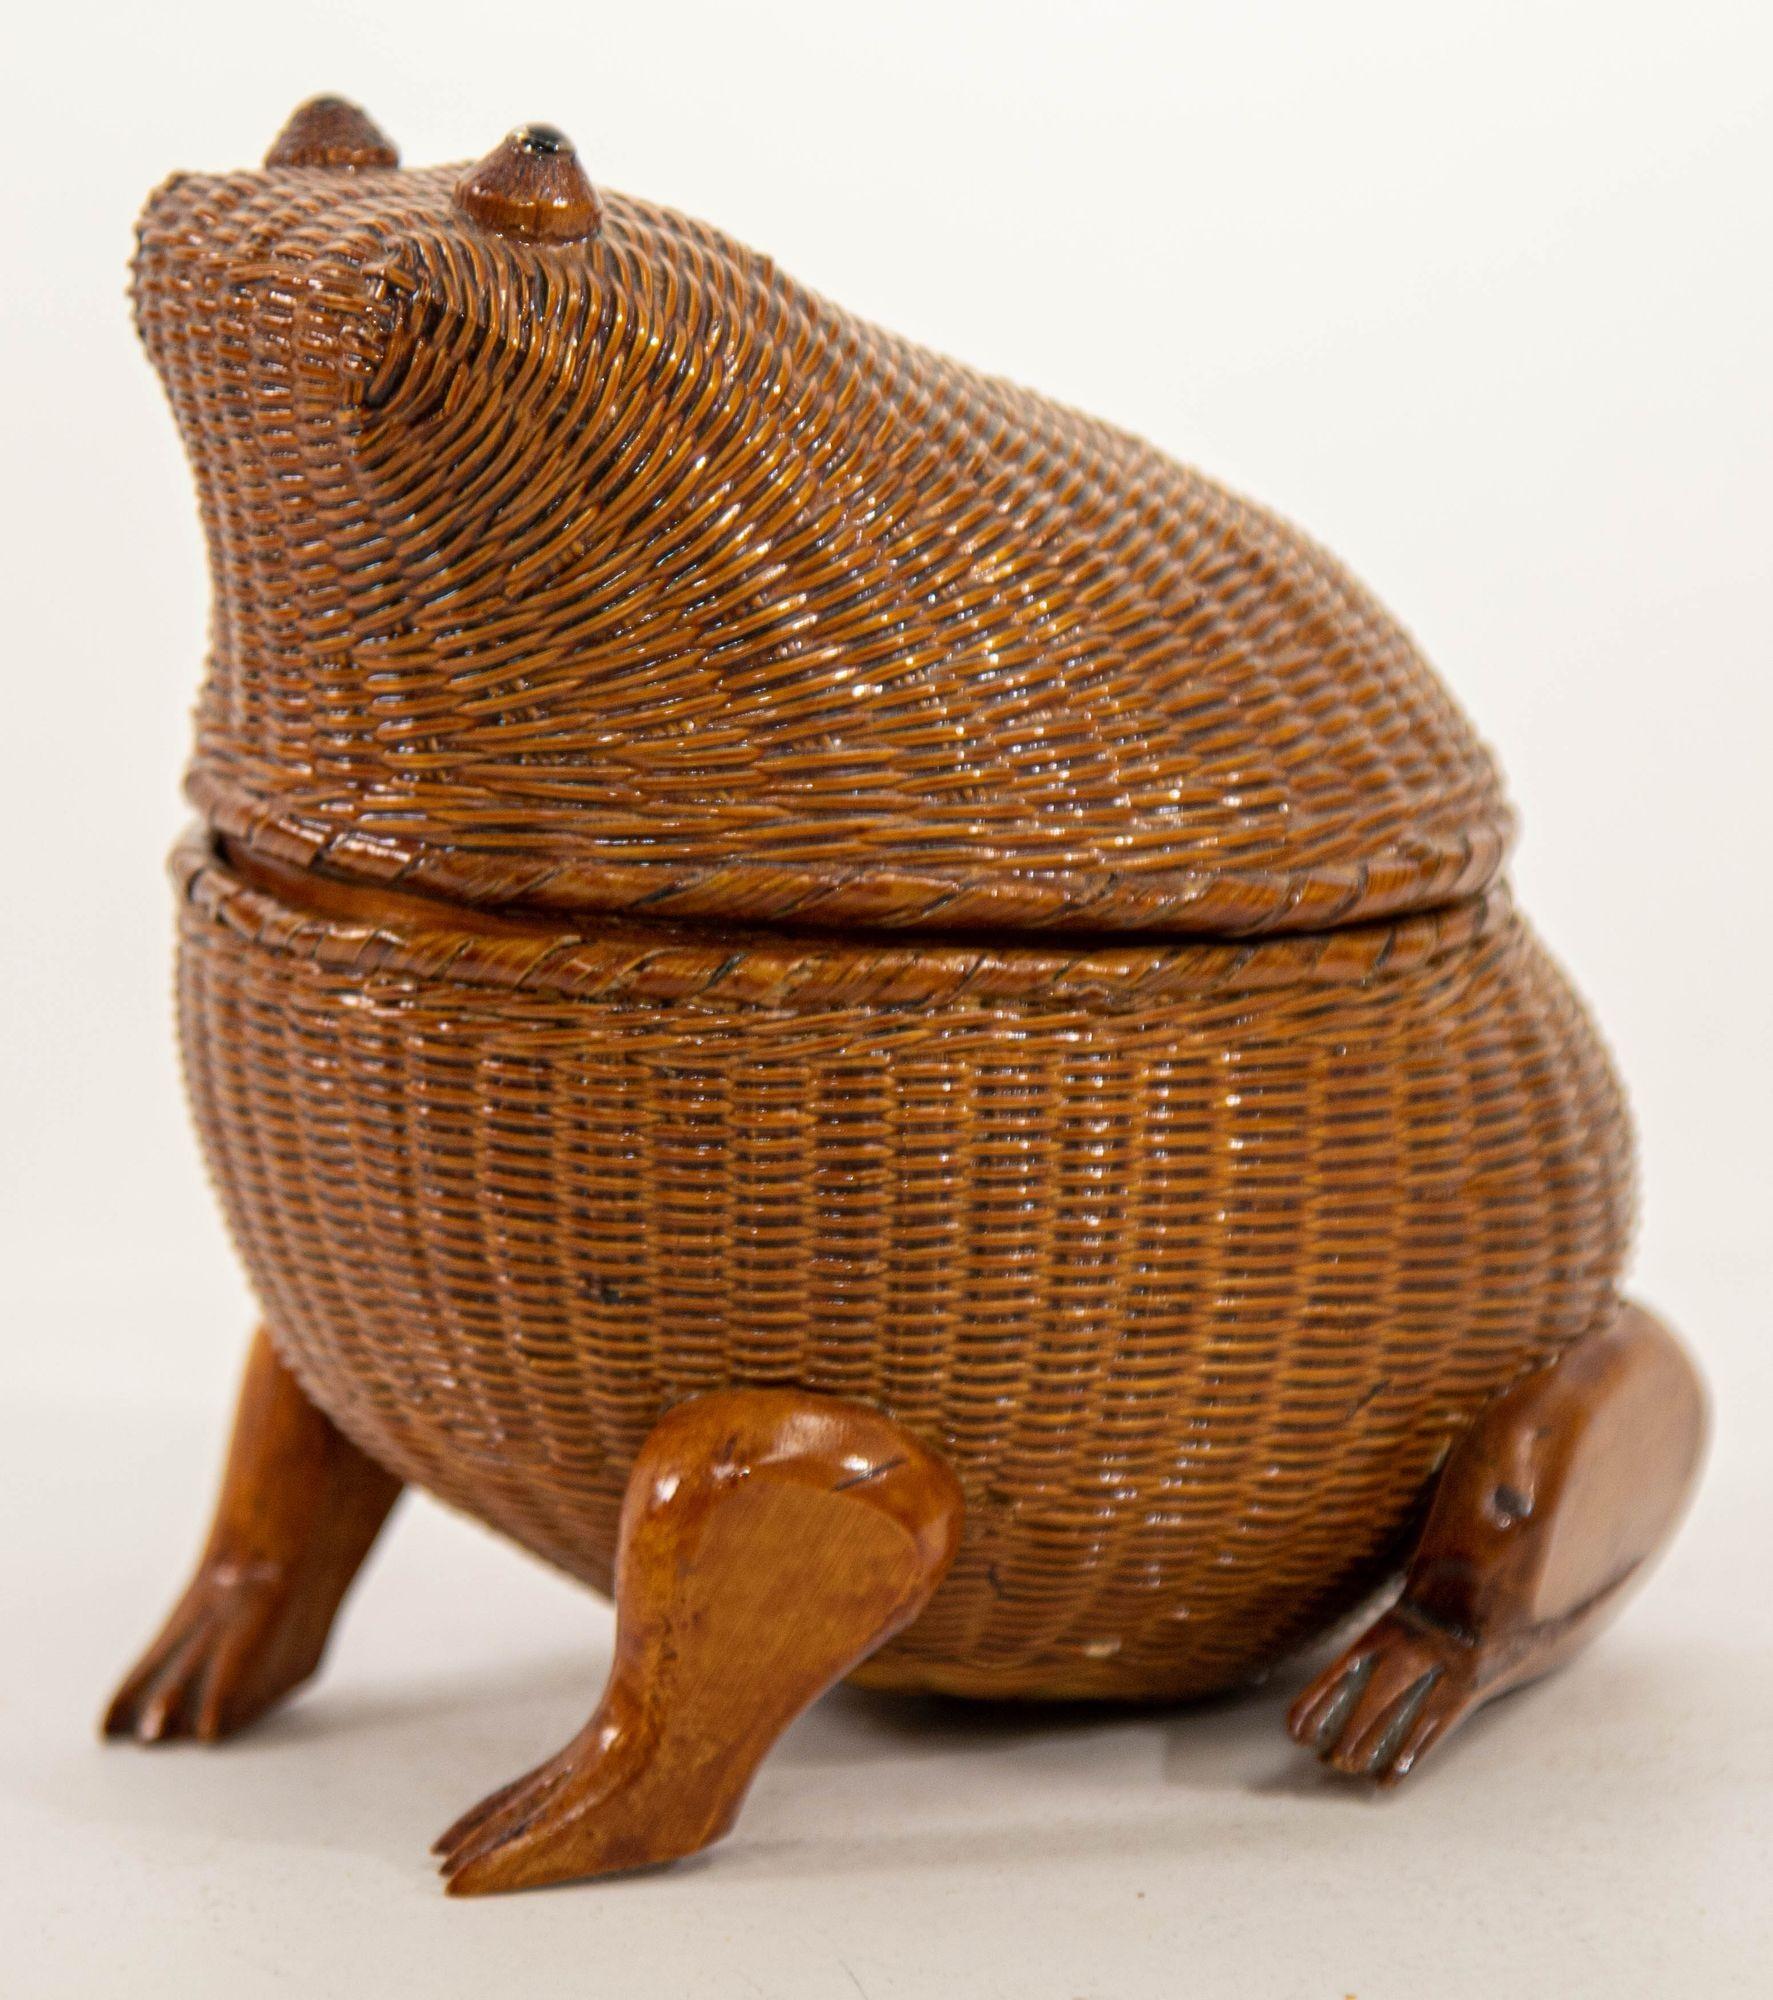 Vintage Chinese wicker rattan frog shaped lidded trinket box.
midcentury woven rattan whimsical toad, Collectible woven wicker or rattan frog toad lidded basket.
A sweet, funny vintage woven basket for the frog lover.
This small frog basket has a